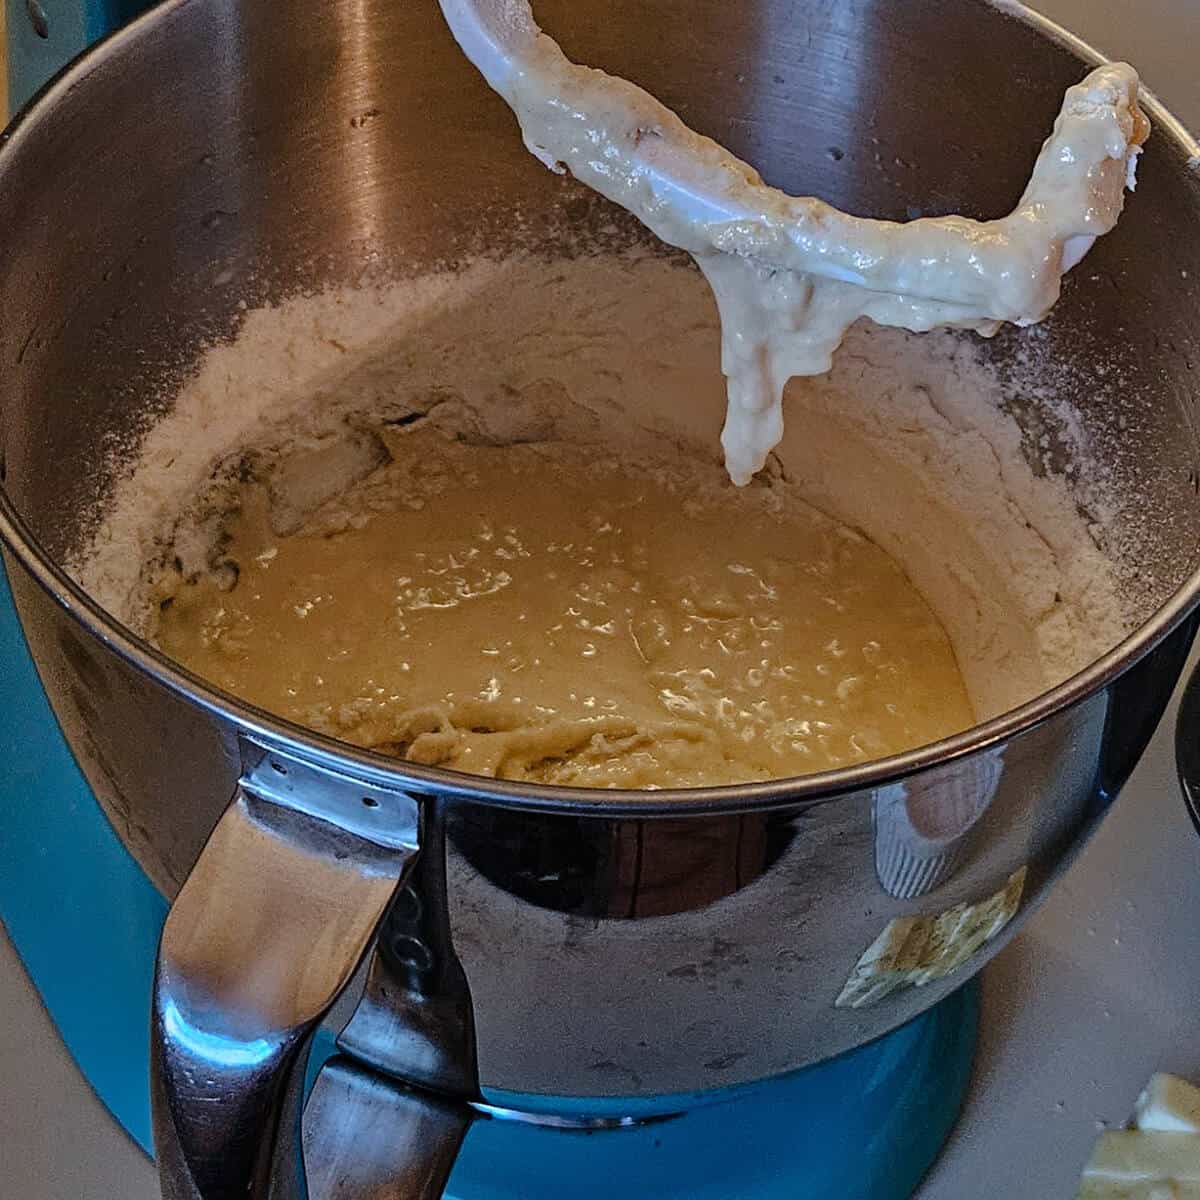 stand mixer interior, with wet batter and sry ingredients clinging to sides of bowl, dough hook dripping.